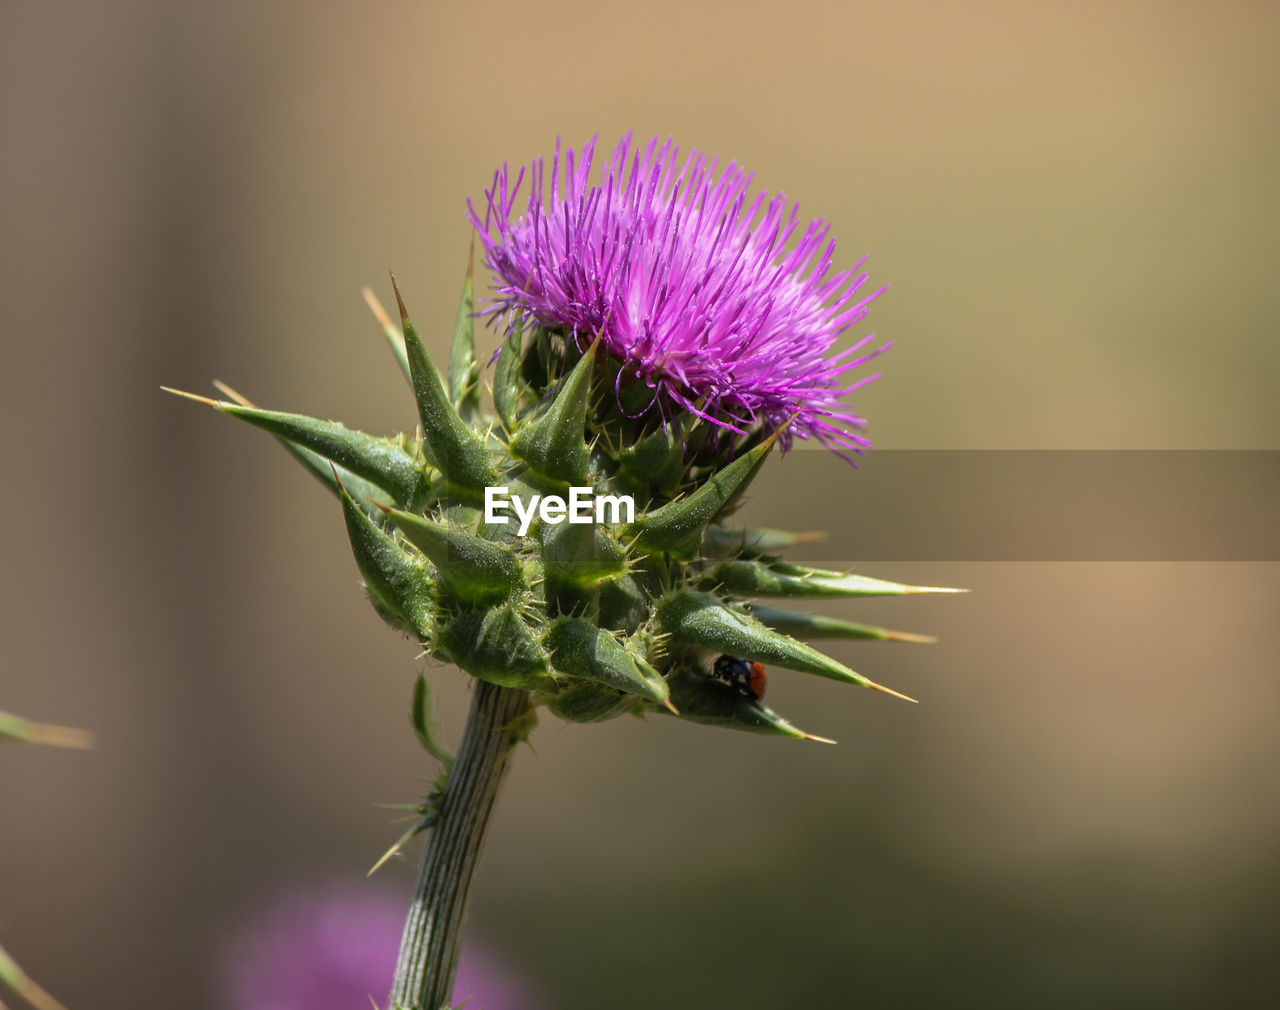 CLOSE-UP OF THISTLE AGAINST PURPLE FLOWER